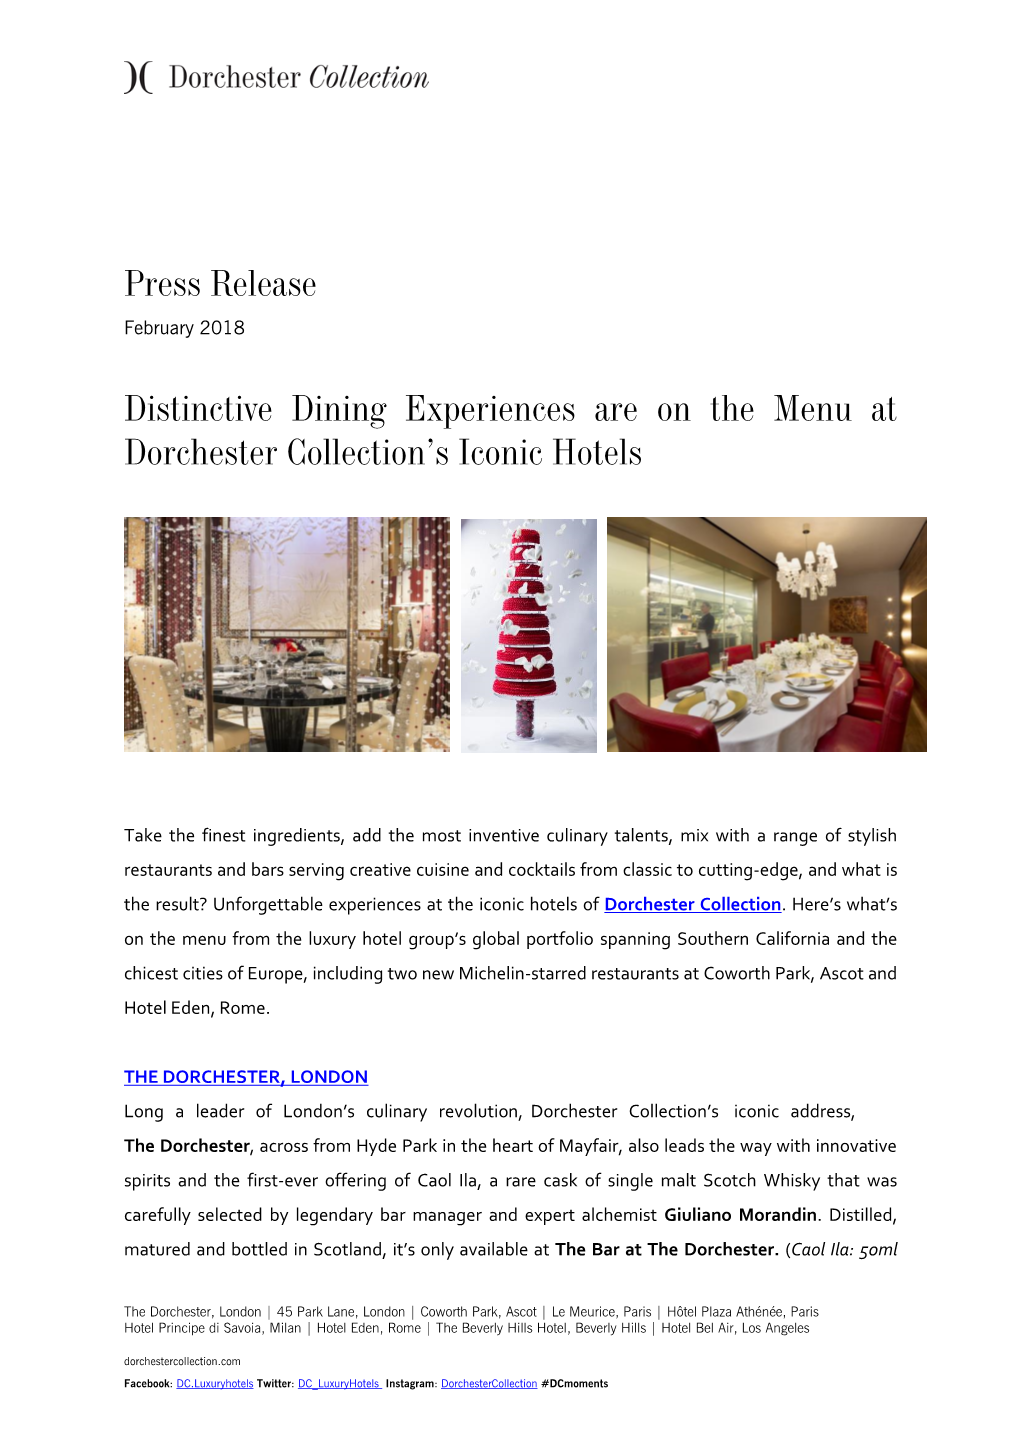 Press Release Distinctive Dining Experiences Are on the Menu at Dorchester Collection's Iconic Hotels